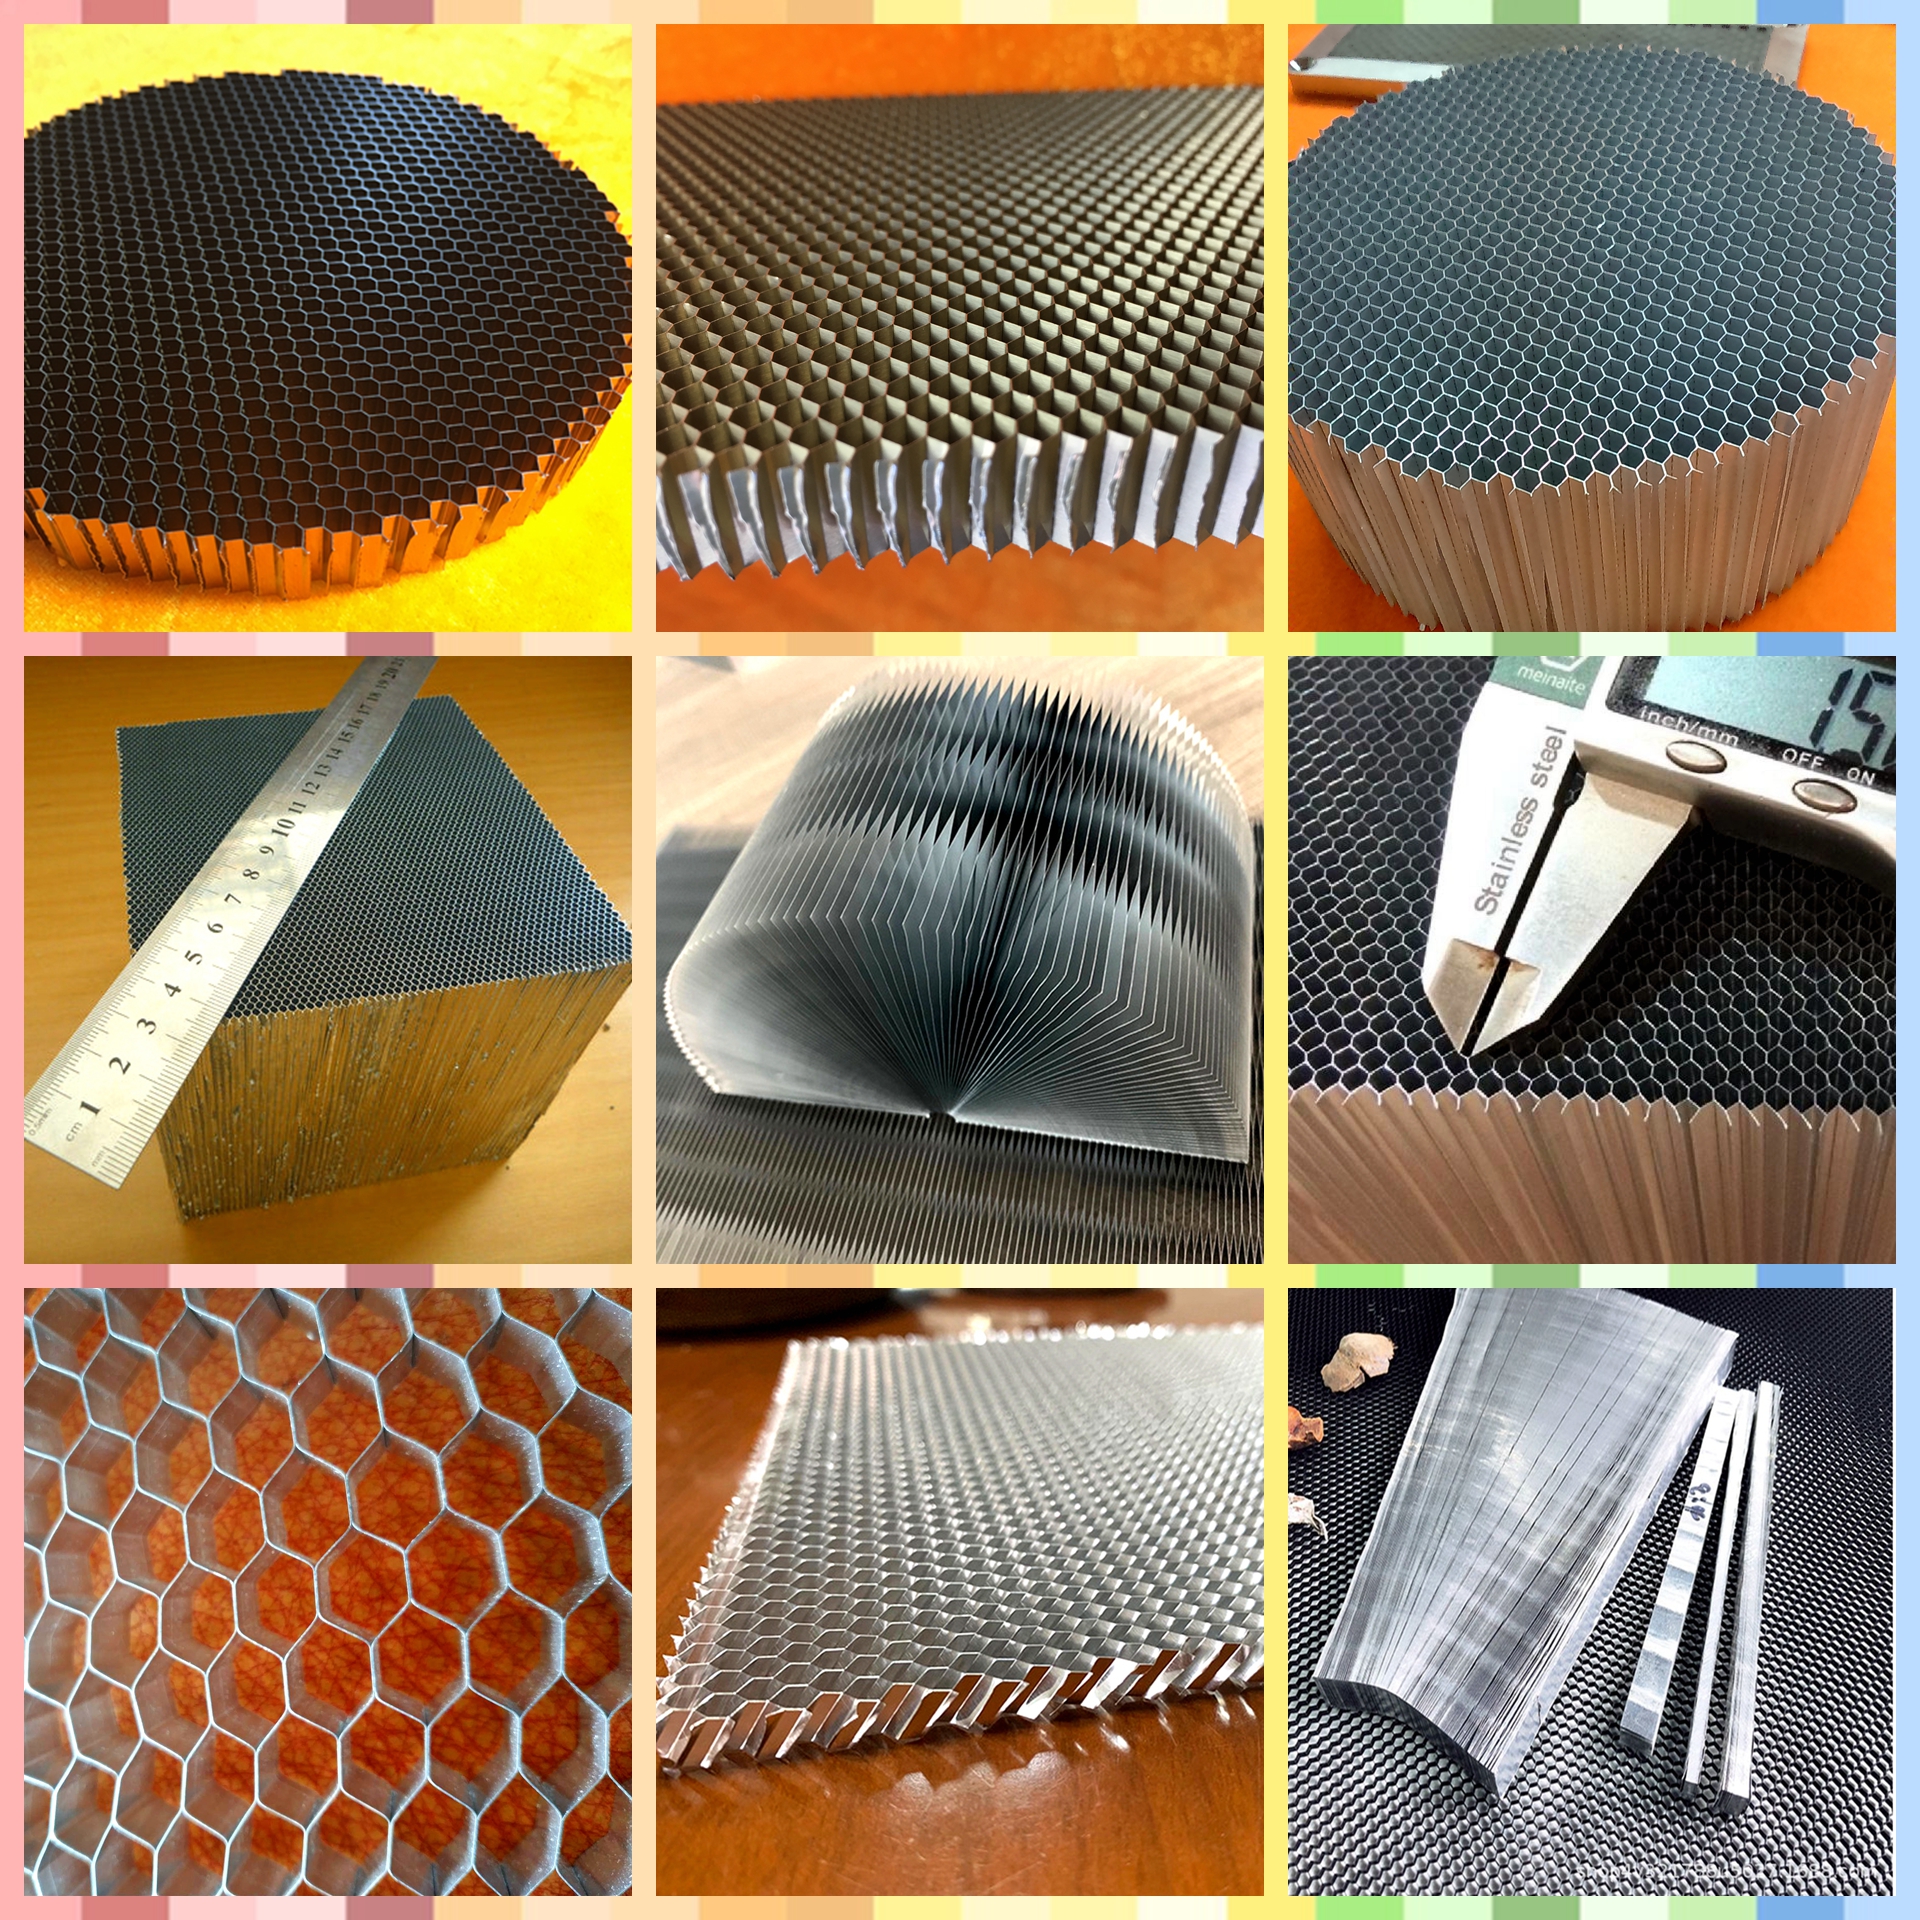 Sample pictures of aluminum honeycomb core